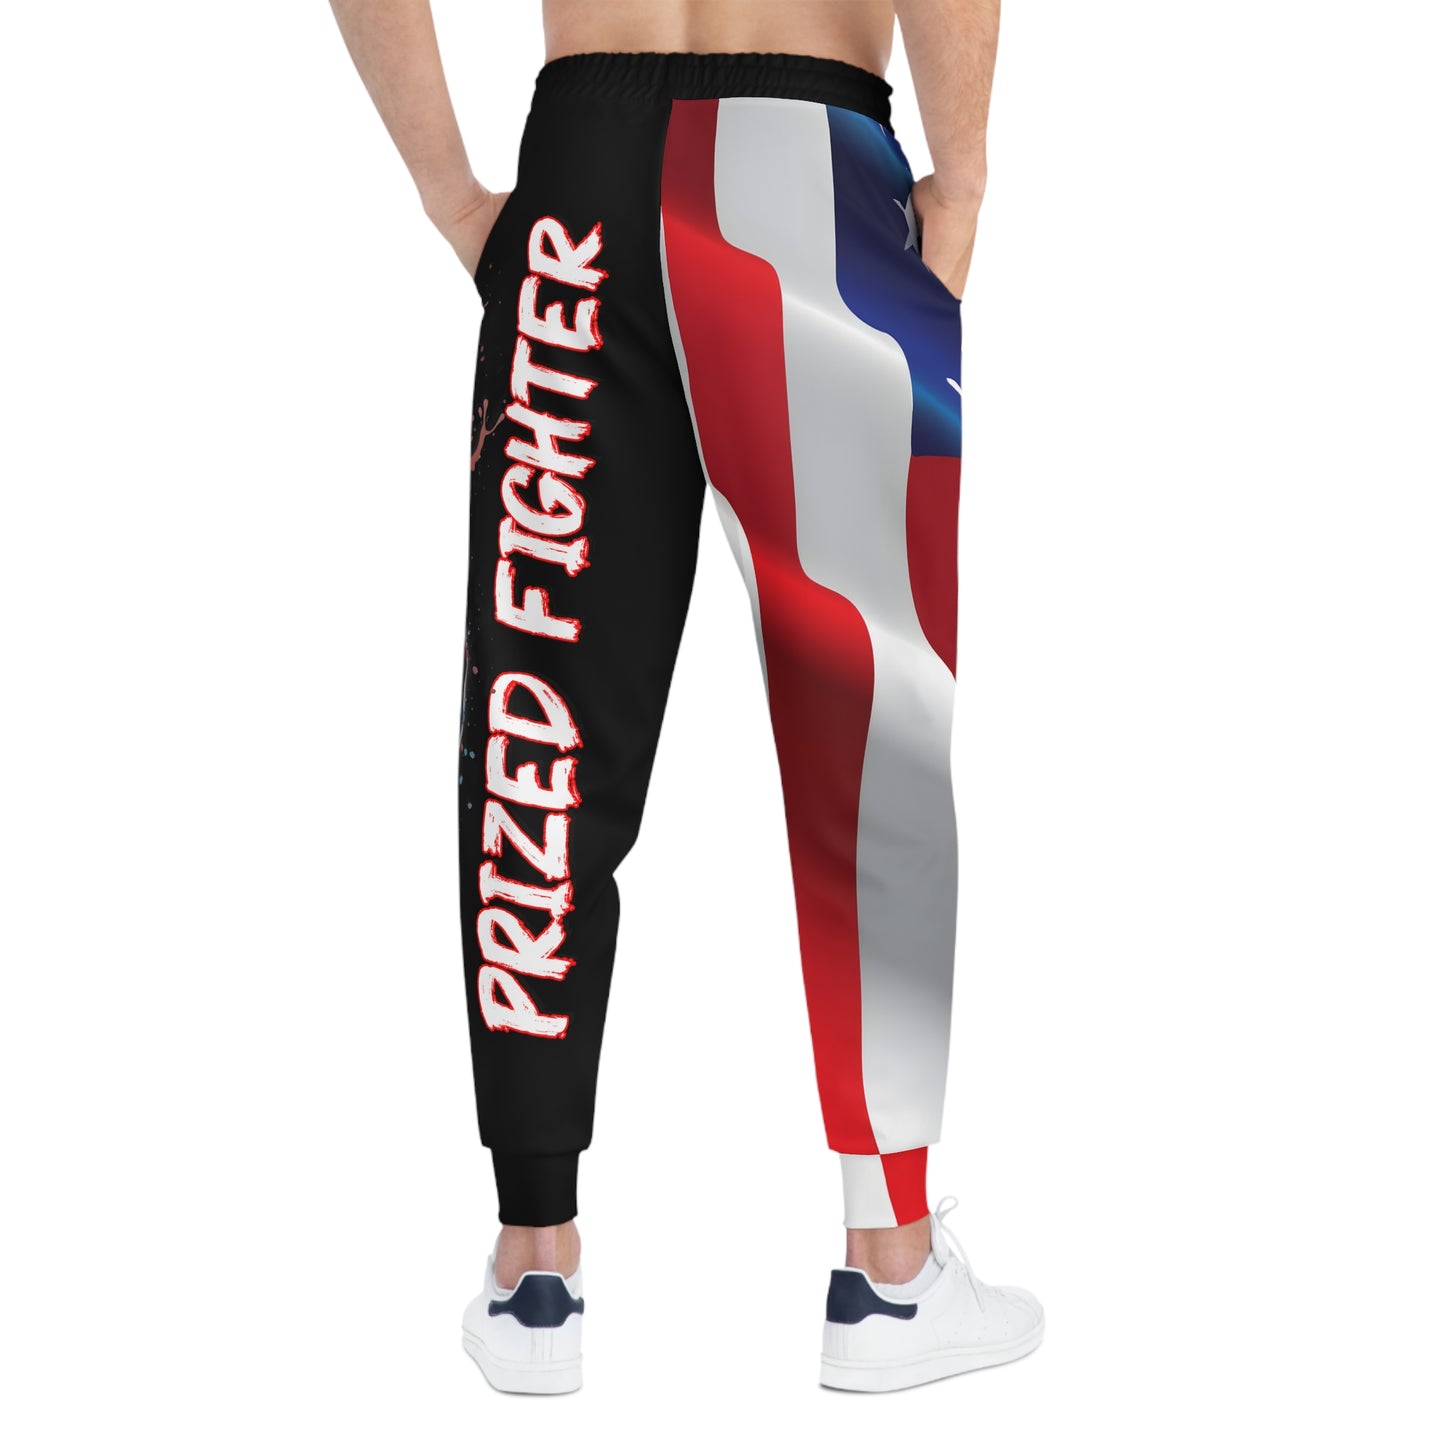 Kǎtōng Piàn - Prized Fighter Collection - America - 002 - Athletic Joggers